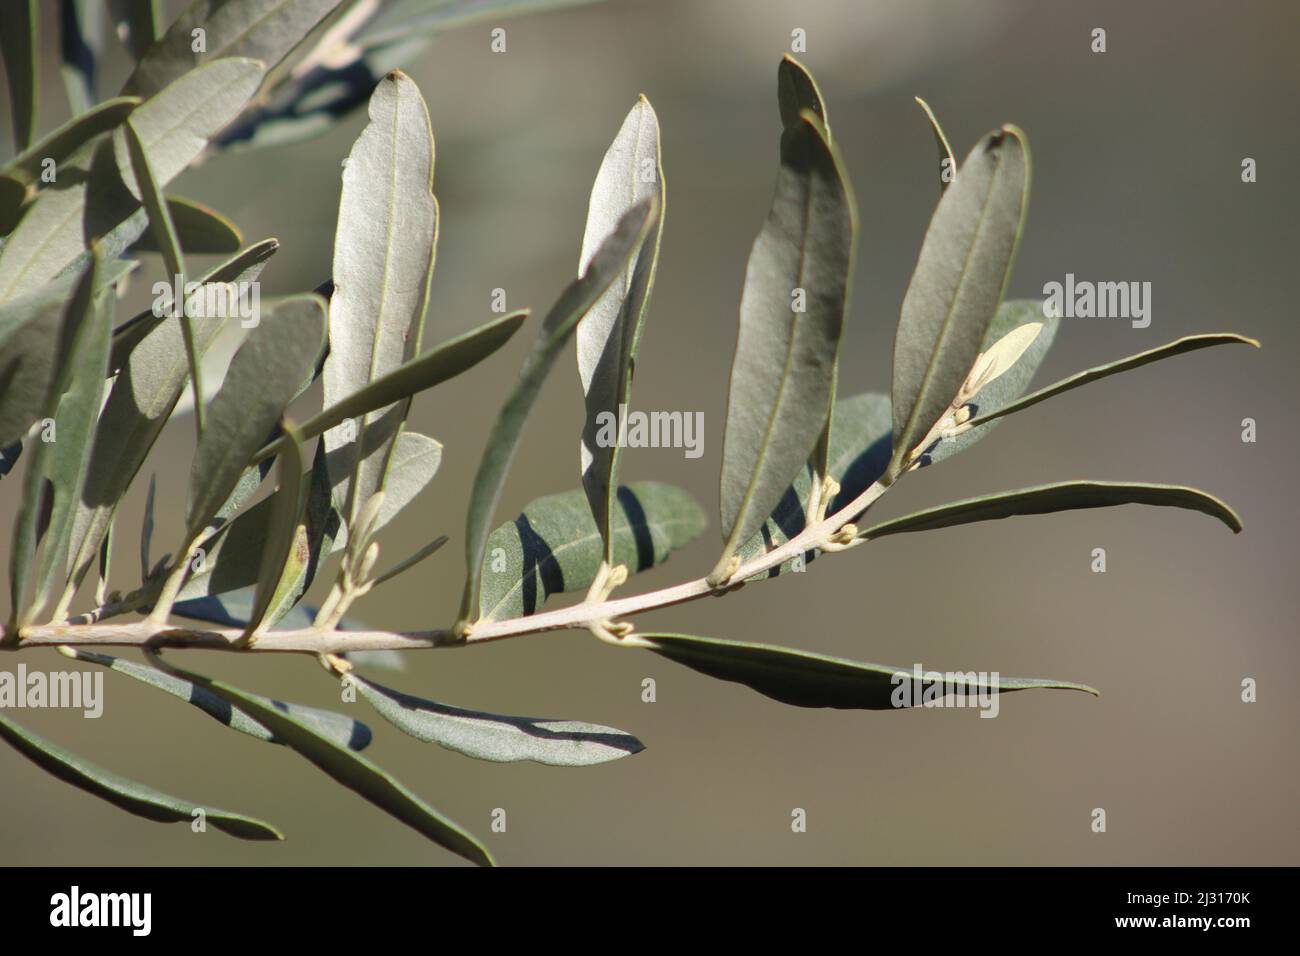 Olive leaves on the twig. Blurred nature background. Stock Photo